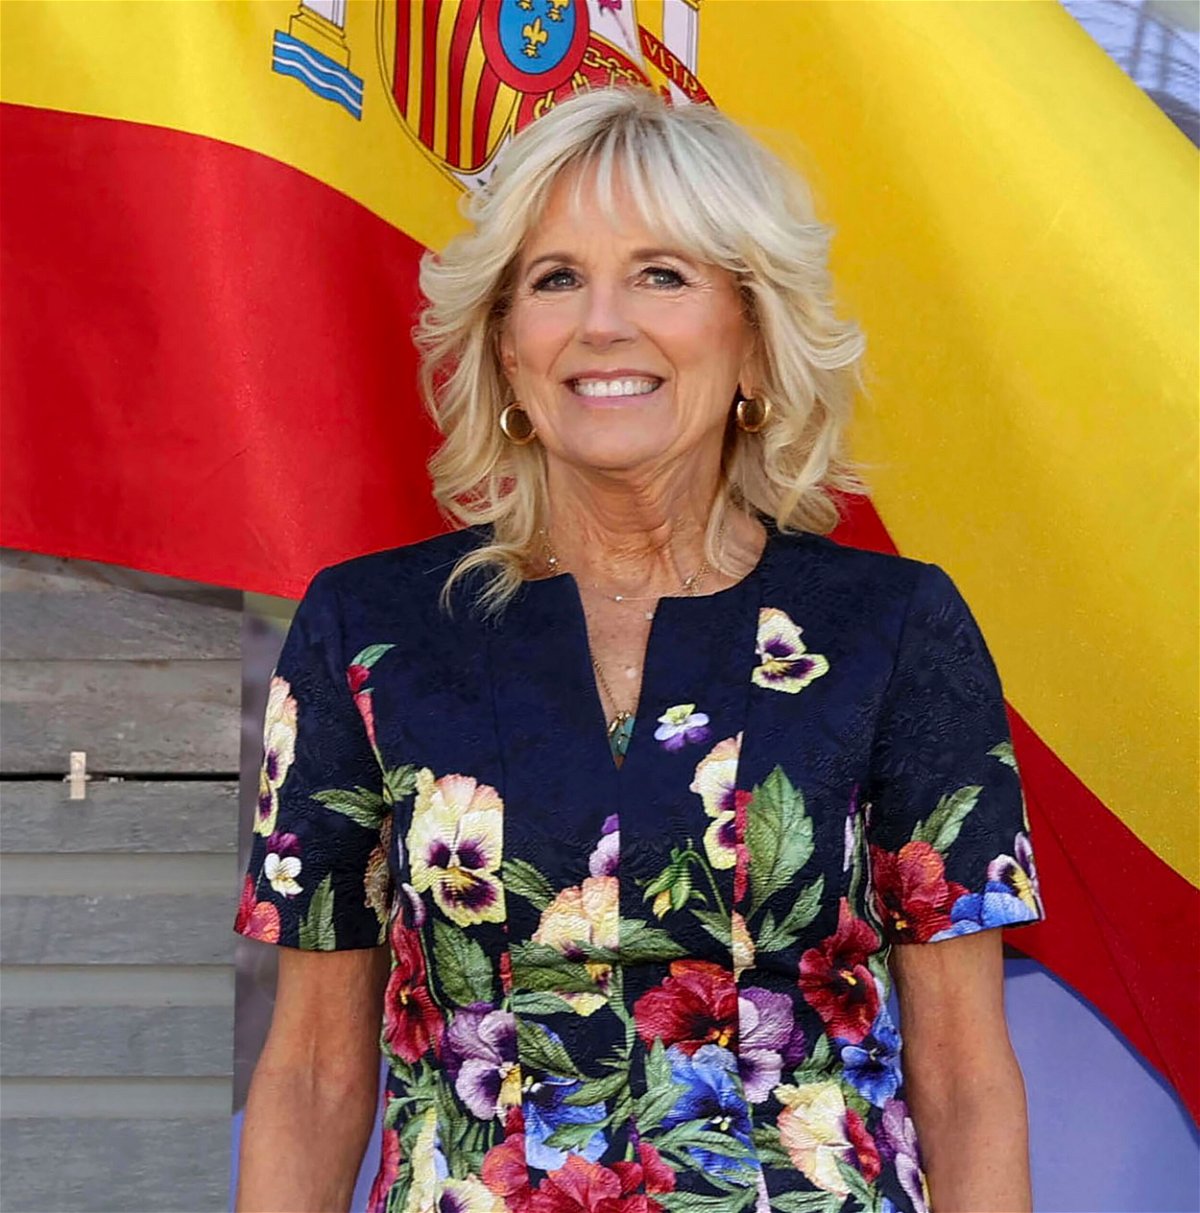 <i>zz/KGC-459/STAR MAX/IPx/AP/FILE</i><br/>First lady Jill Biden has tested negative for Covid-19 after a rebound case and will return to the Washington